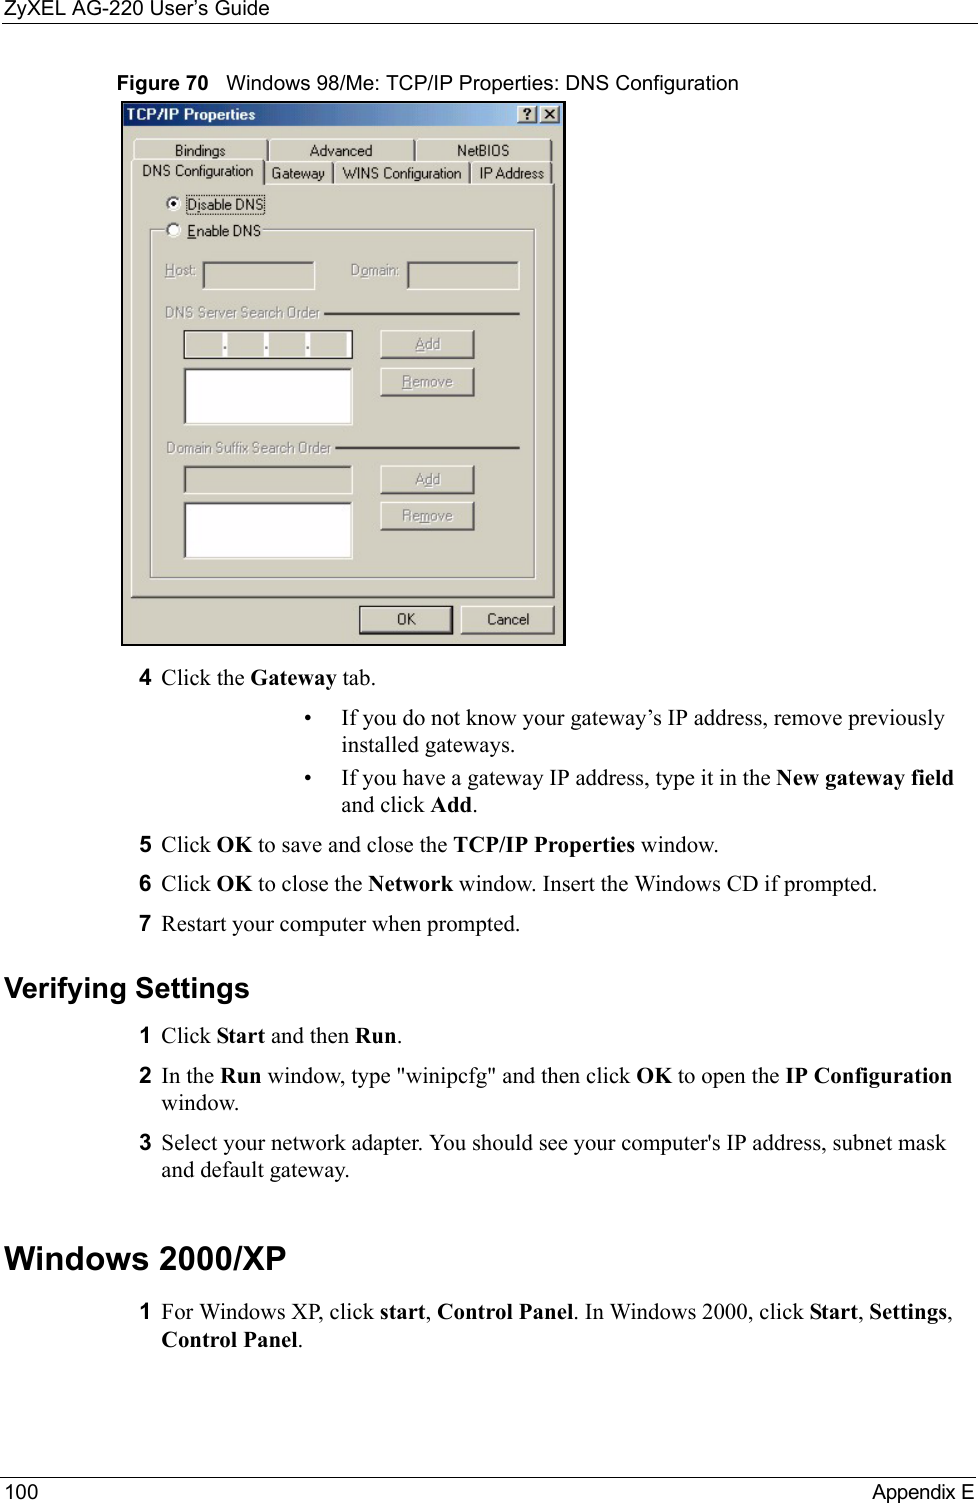 ZyXEL AG-220 User’s Guide100 Appendix EFigure 70   Windows 98/Me: TCP/IP Properties: DNS Configuration4Click the Gateway tab.• If you do not know your gateway’s IP address, remove previously installed gateways.• If you have a gateway IP address, type it in the New gateway field and click Add.5Click OK to save and close the TCP/IP Properties window.6Click OK to close the Network window. Insert the Windows CD if prompted.7Restart your computer when prompted.Verifying Settings1Click Start and then Run.2In the Run window, type &quot;winipcfg&quot; and then click OK to open the IP Configuration window.3Select your network adapter. You should see your computer&apos;s IP address, subnet mask and default gateway.Windows 2000/XP1For Windows XP, click start, Control Panel. In Windows 2000, click Start, Settings, Control Panel.